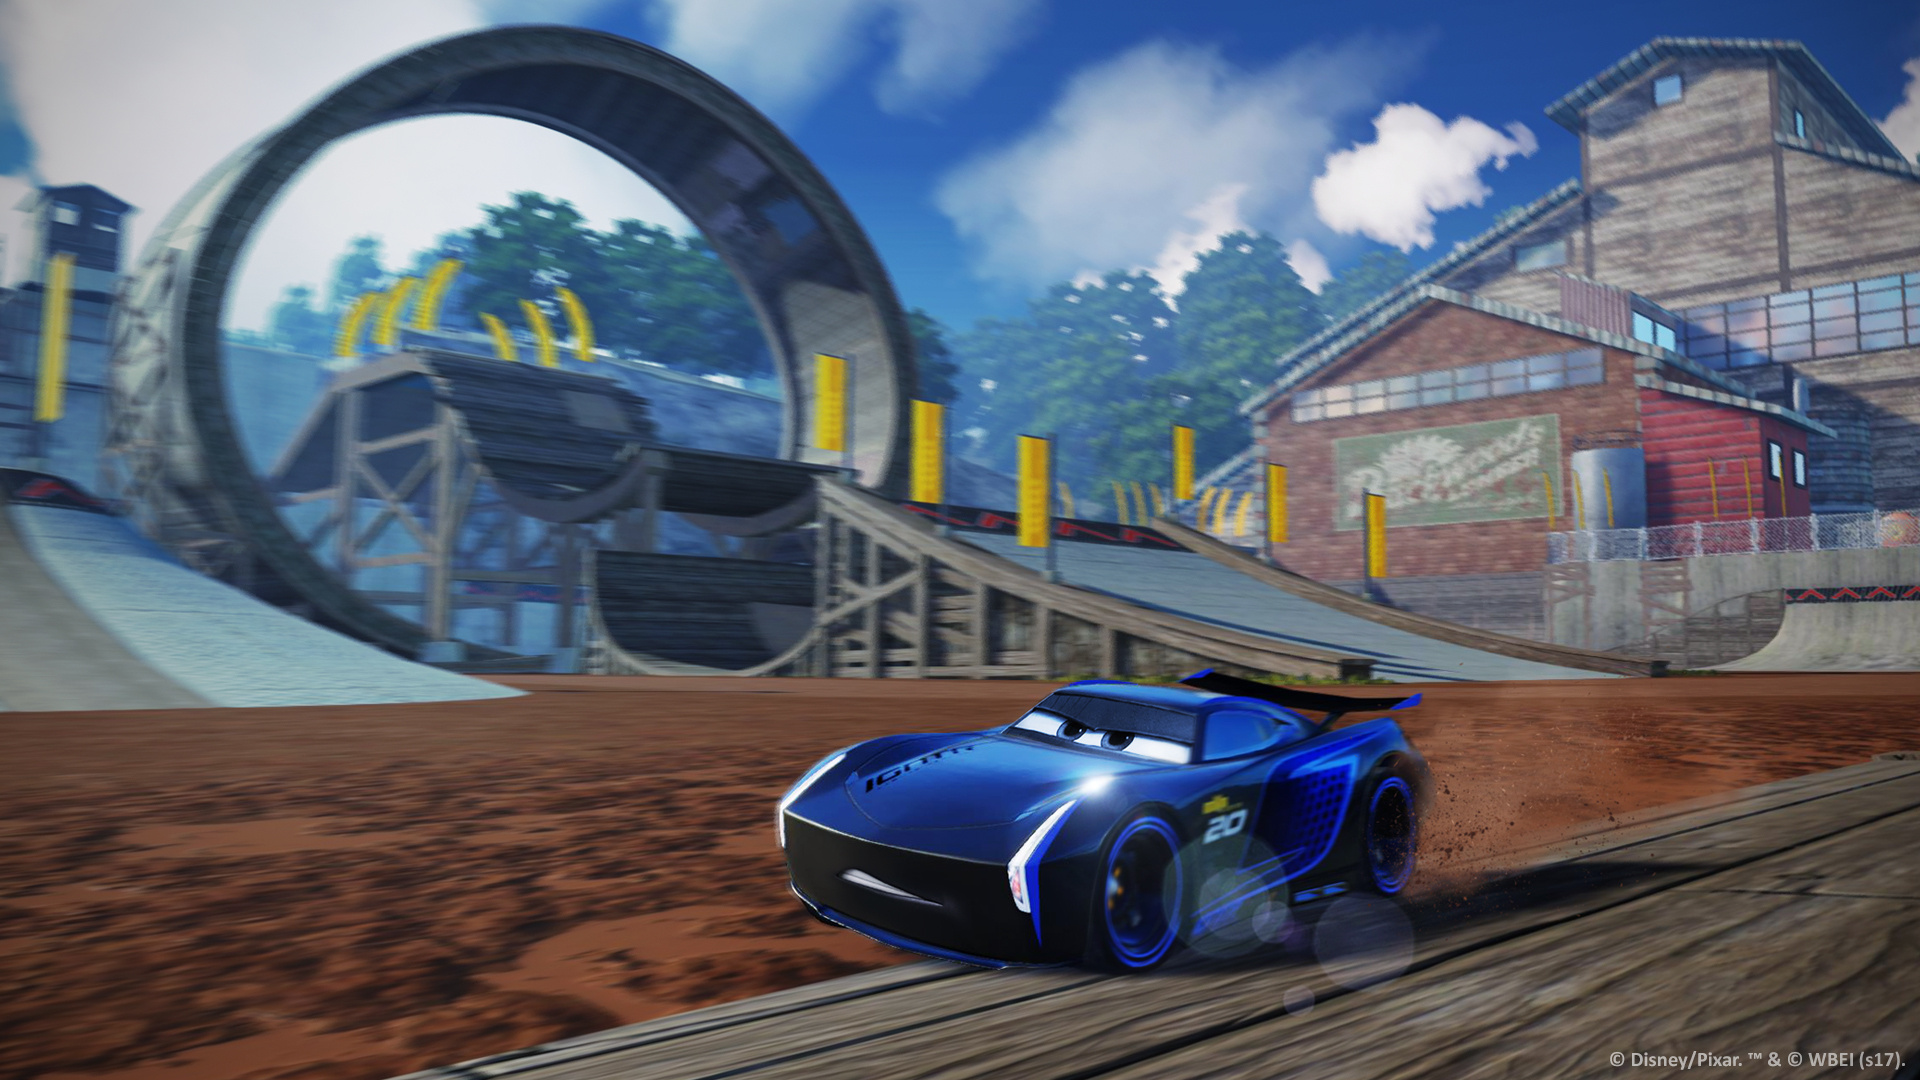 cars 3 driven to win wii u ign